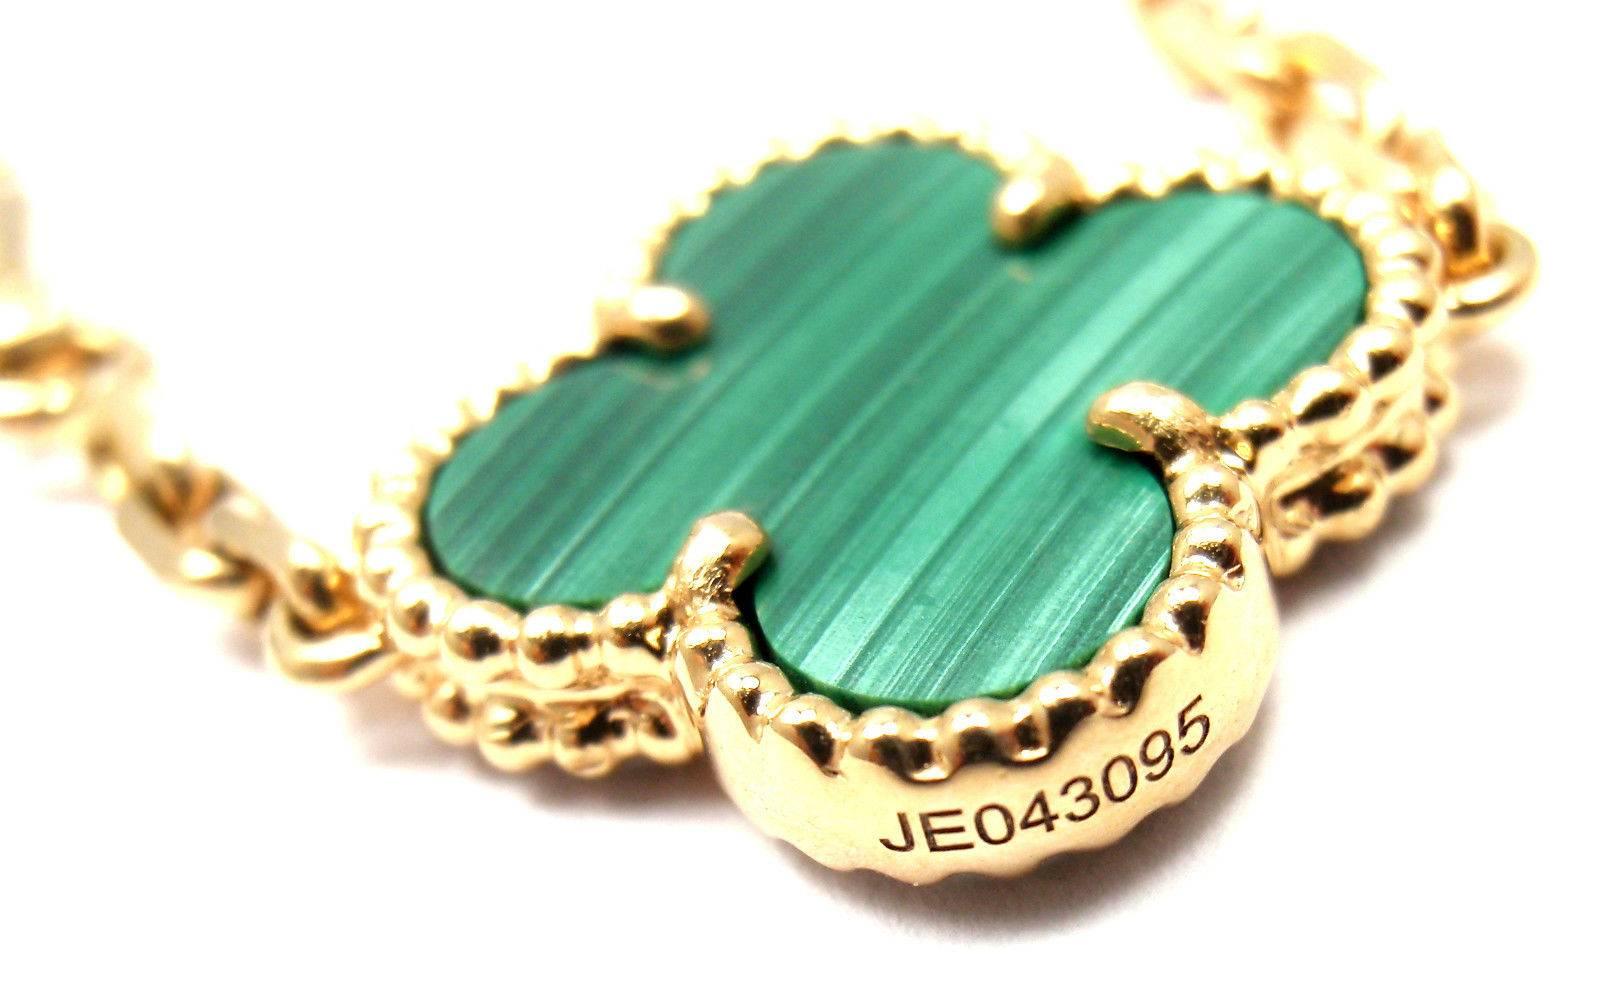 18k Yellow Gold Alhambra 20 Motifs Malachite Necklace by
Van Cleef & Arpels.
With 20 motifs of Malachite Alhambra stones 15mm each
This necklace comes with VCA box.

Details:
Length: 33